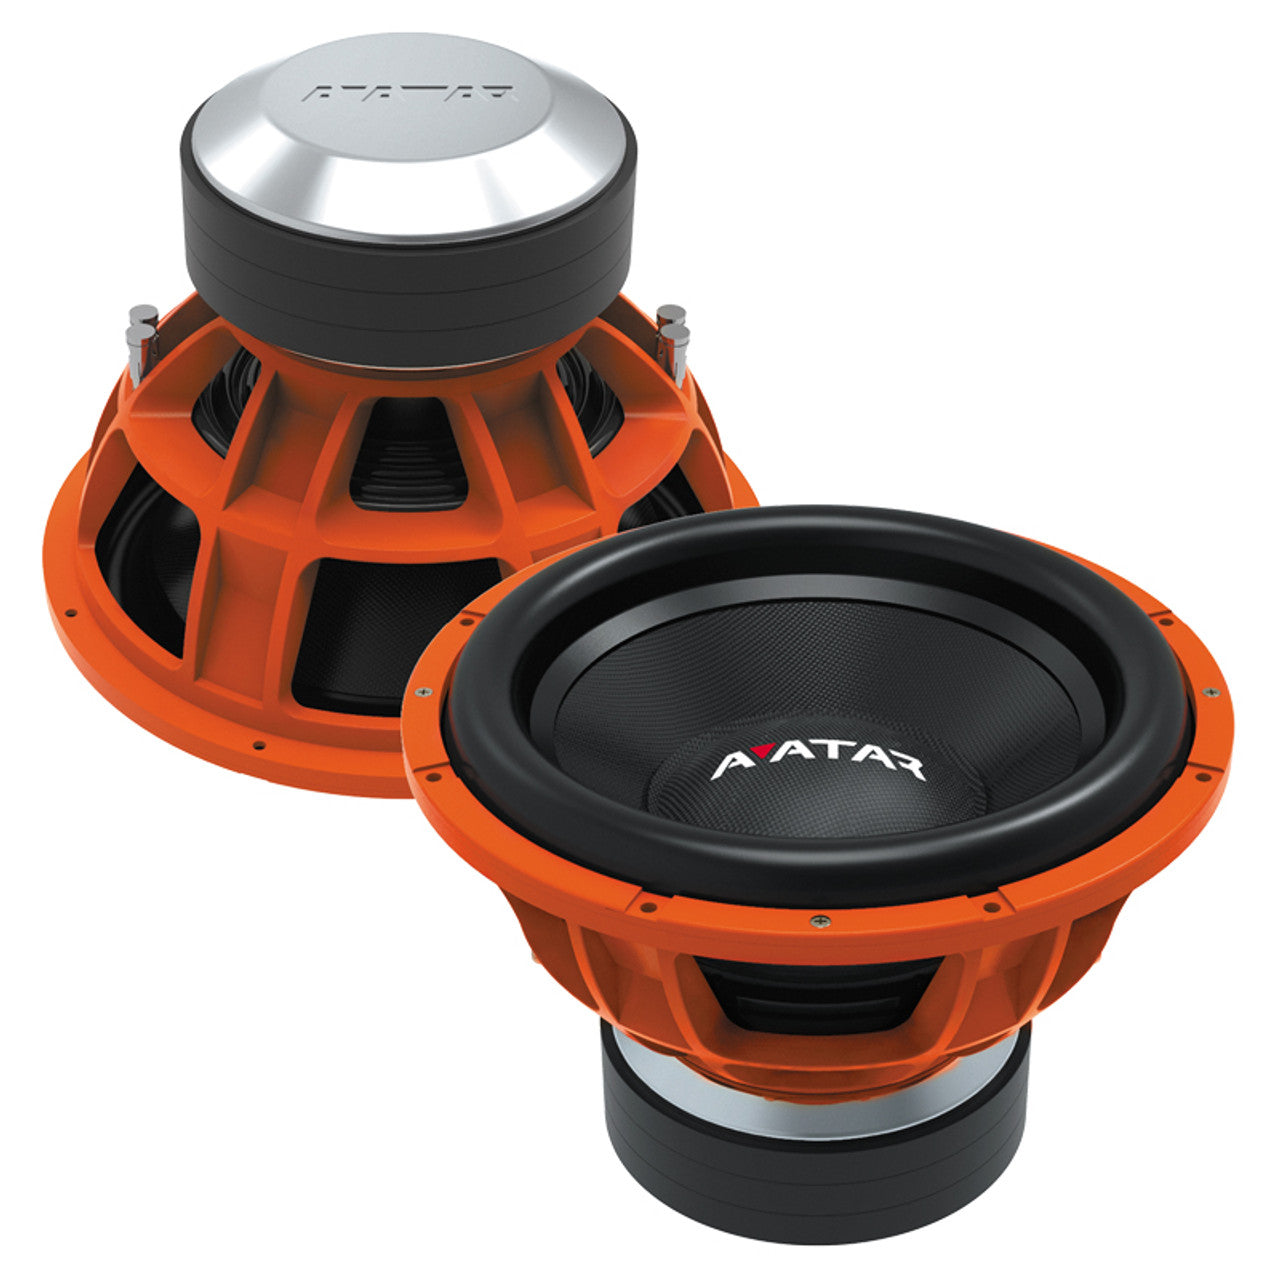 Avatar SVL-1547 Volcano 15" 3800W RMS Subwoofer Dual 2 ohm